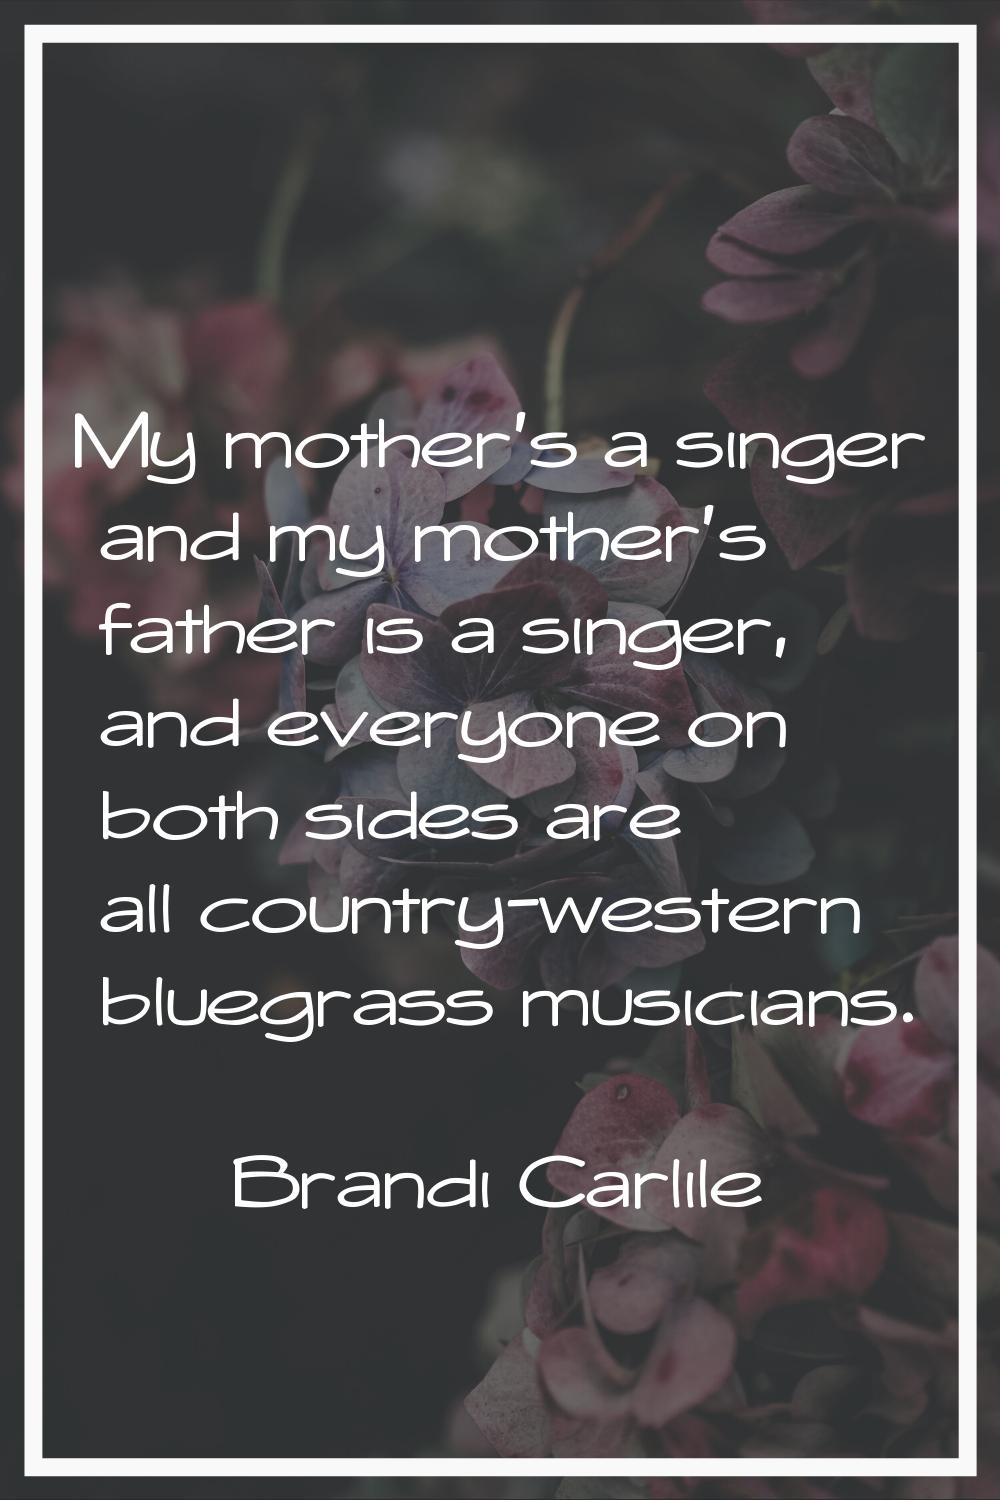 My mother's a singer and my mother's father is a singer, and everyone on both sides are all country